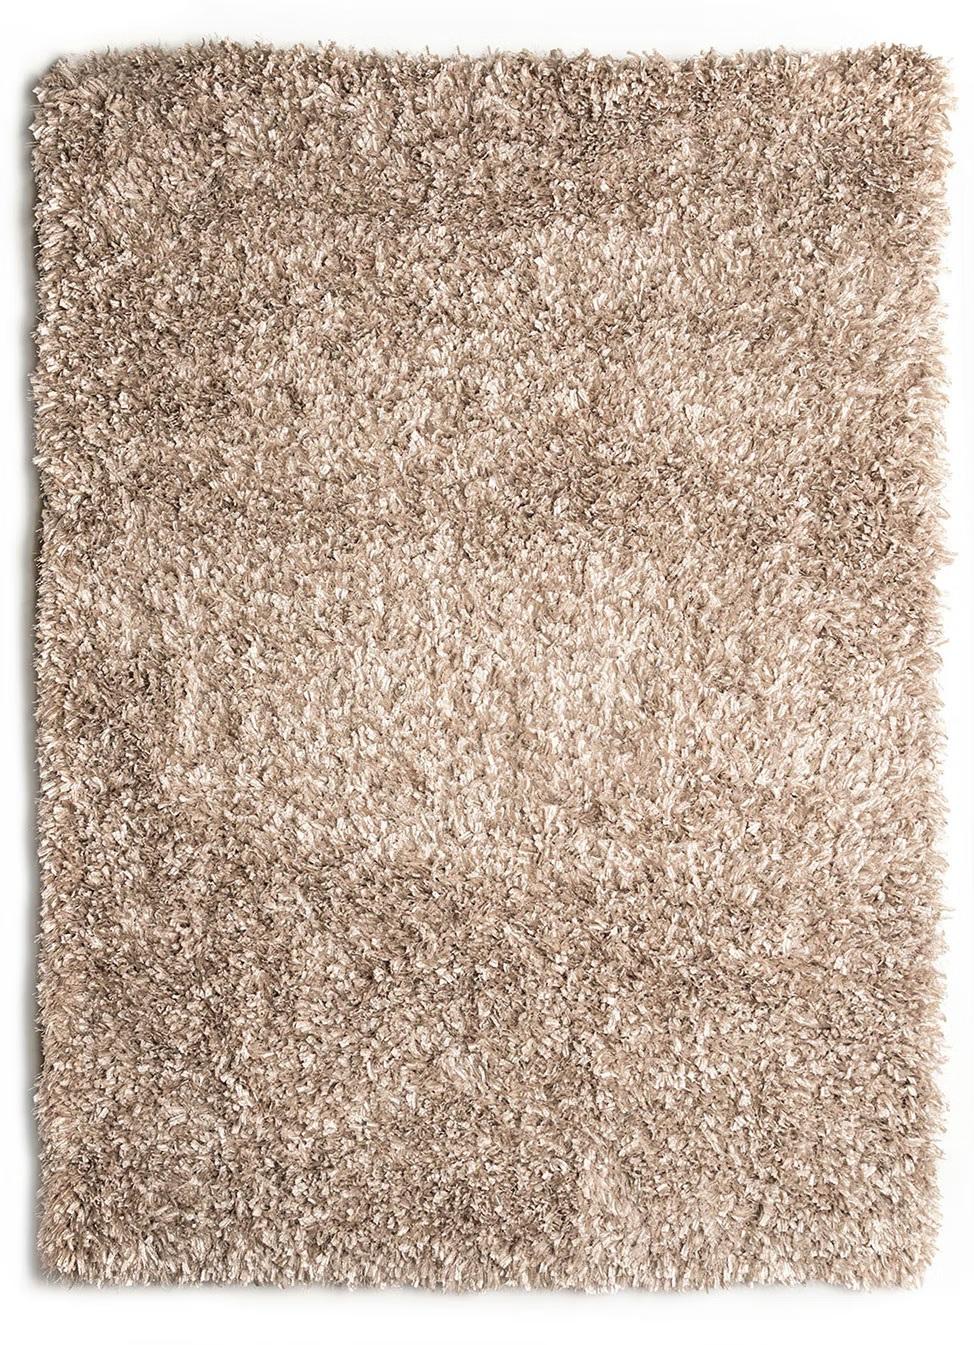 Contemporary Area Rug RG4102 Annmarie RG4102 in Beige 